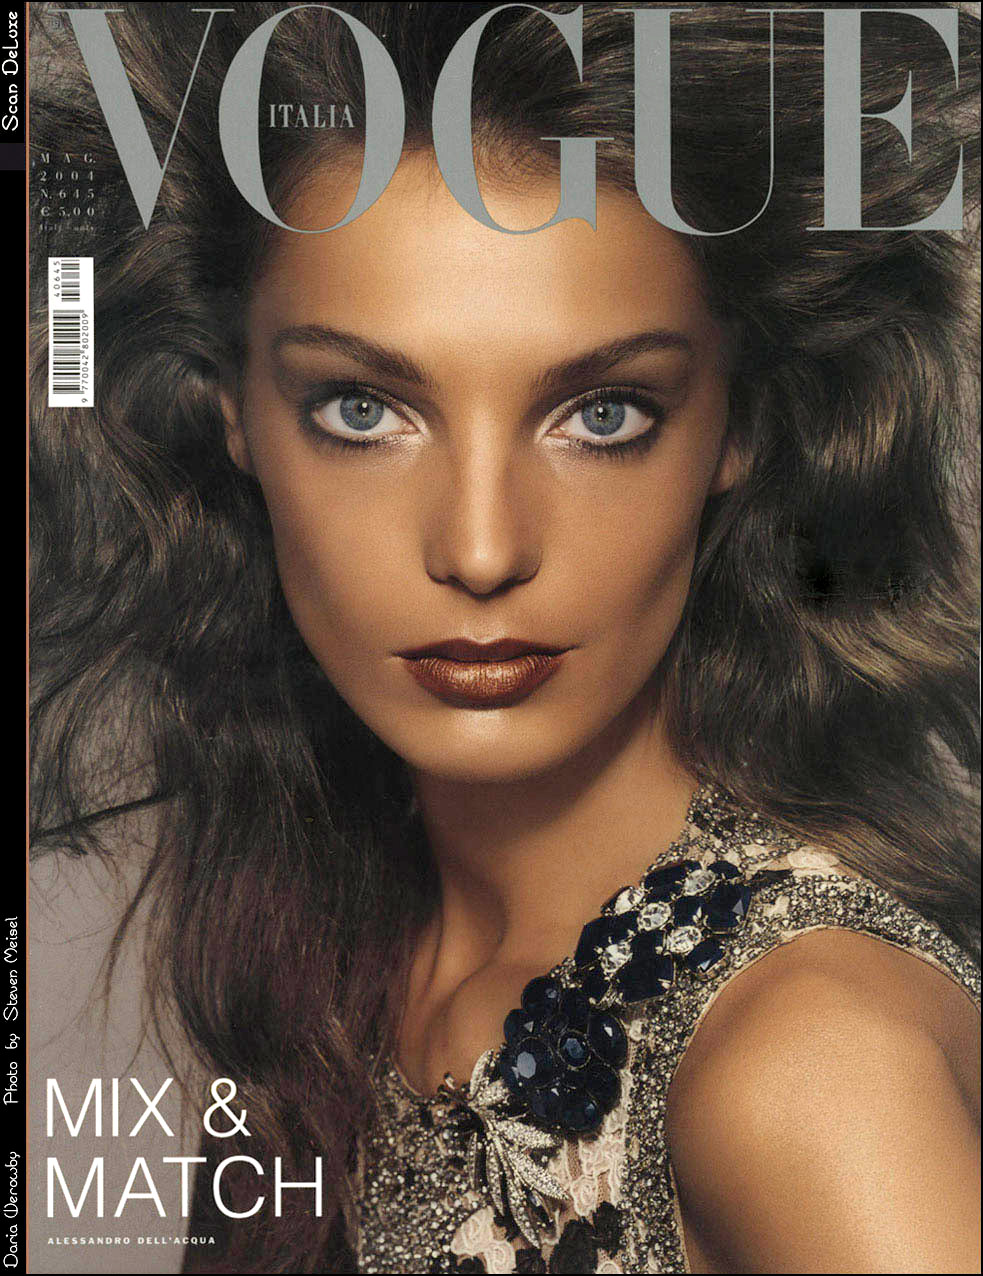 Daria Werbowy Italian Vogue Cover Photo by Steven Meisel May 2004